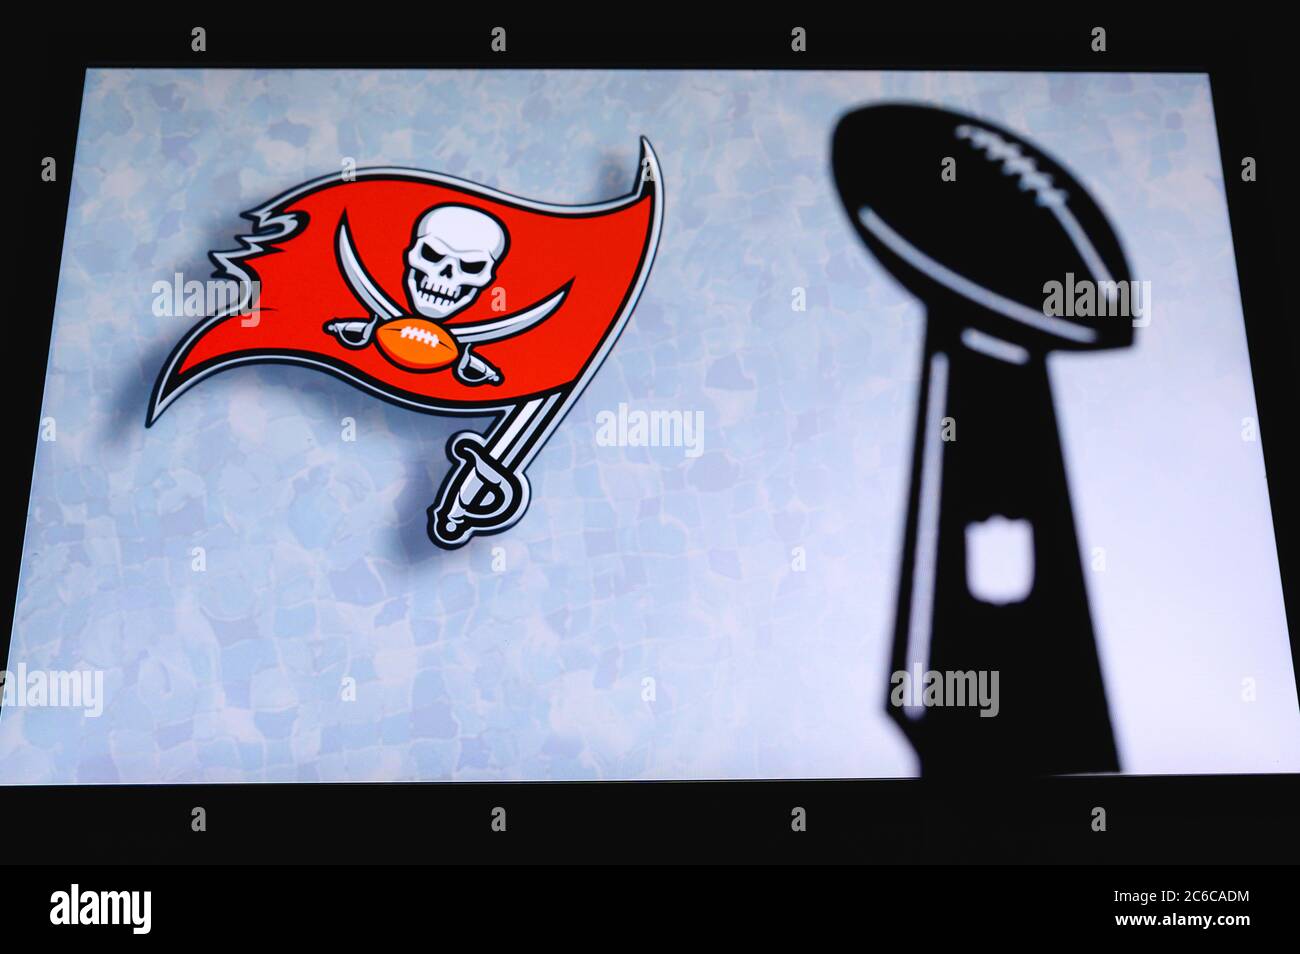 Veroorloven gans Consumeren Tampa Bay Buccaneers professional american football club, silhouette of NFL  trophy, logo of the club in background Stock Photo - Alamy